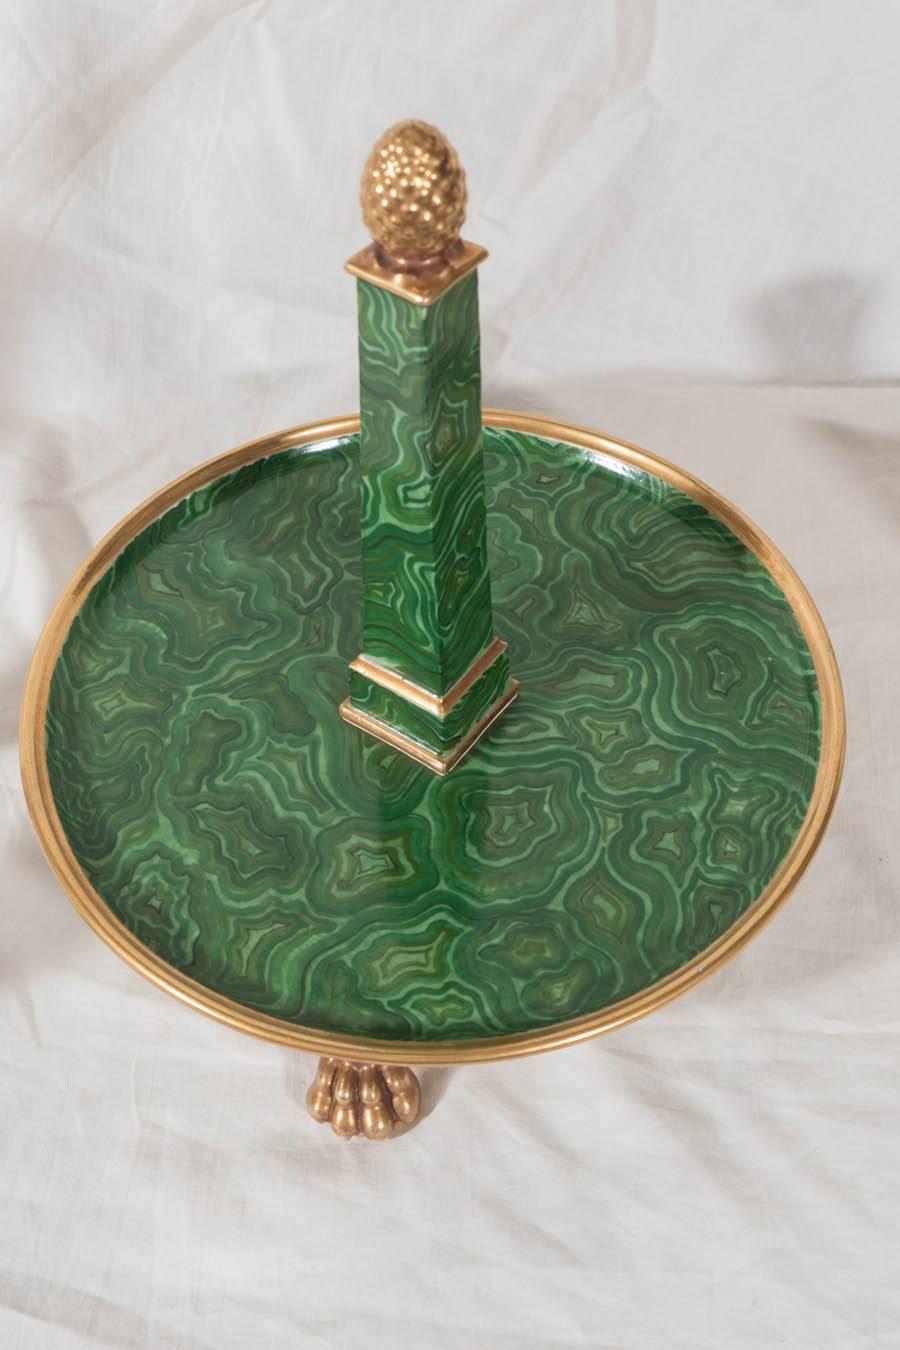  An extraordinary faux malachite pedestal with a set of six egg cups. The  tromp l'oeil porcelain stand mimics perfectly the rich patterned greens of malachite. The base supports an obelisk surmounted by a gilded pineapple finial. The egg cup